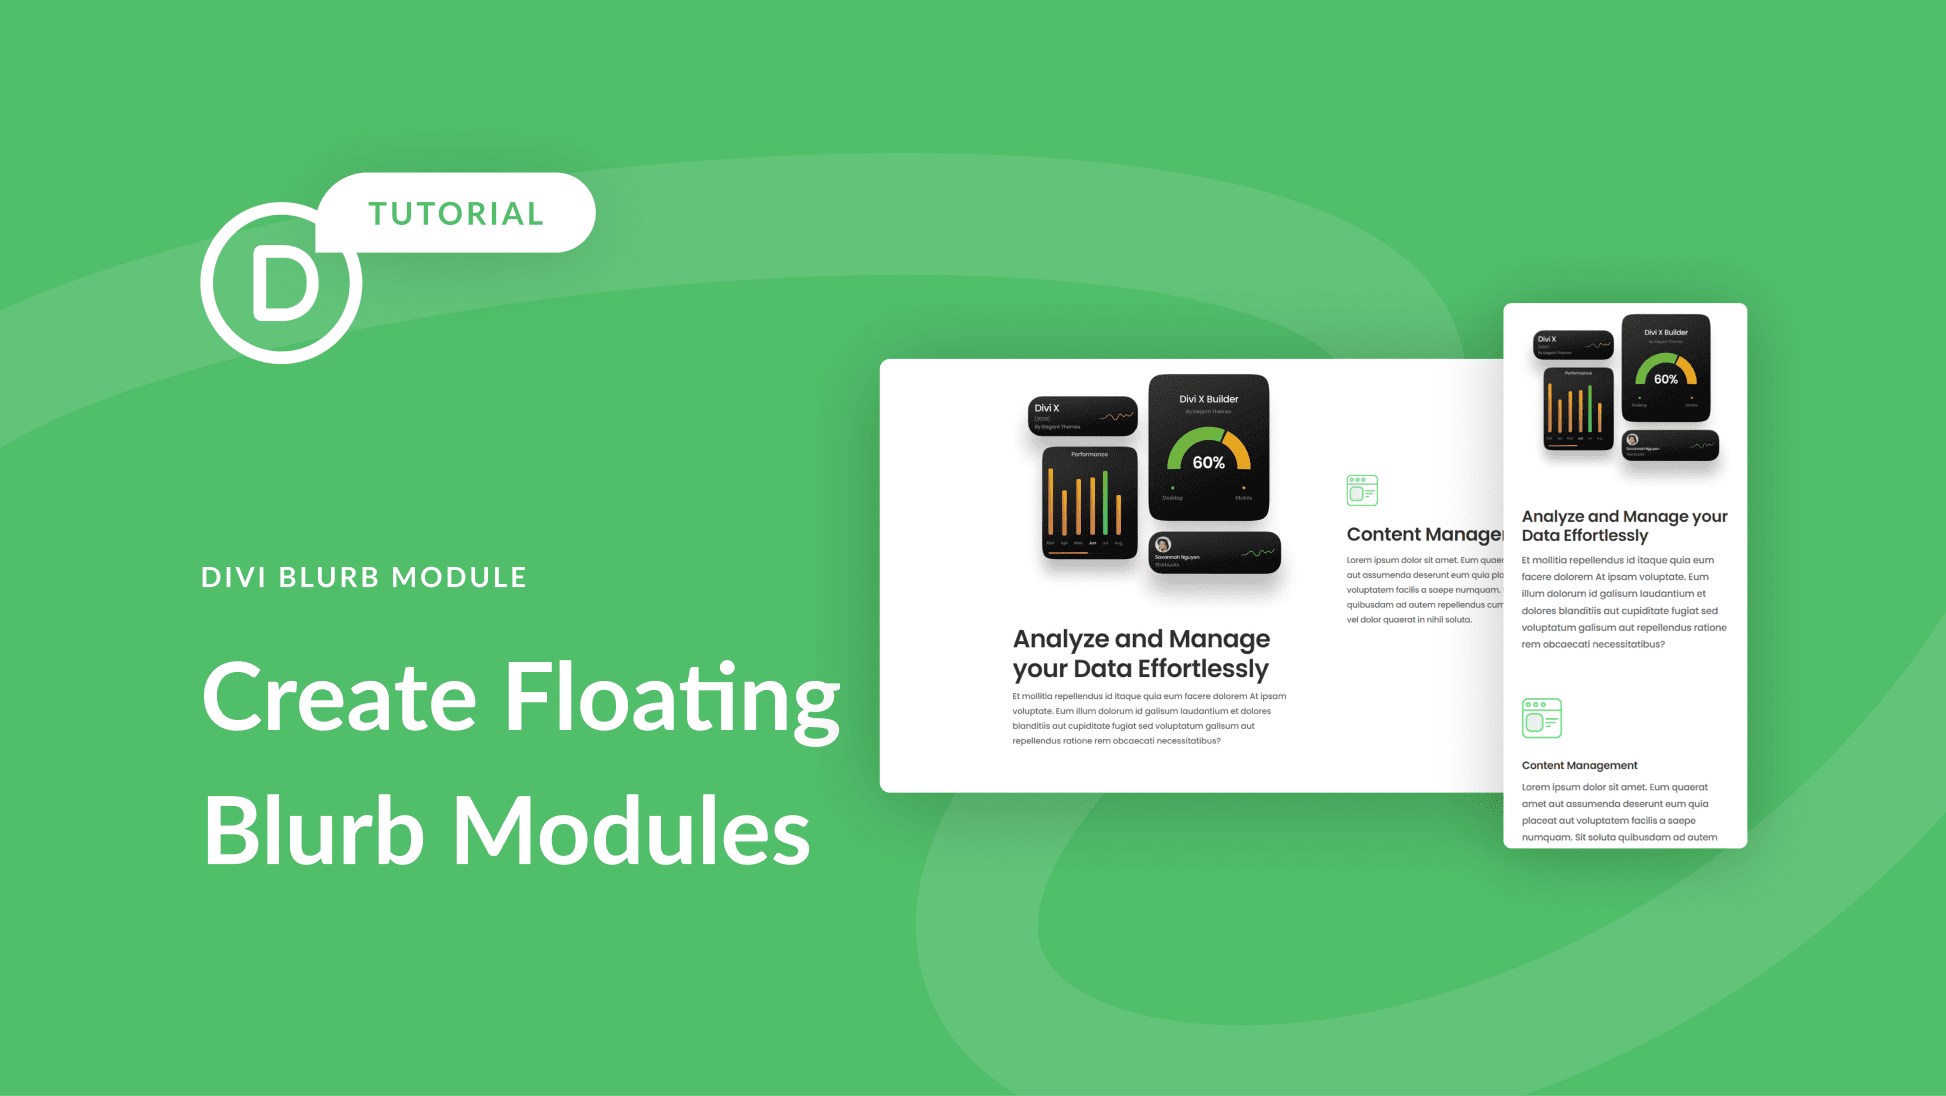 How to Create Floating Blurb Modules with Divi